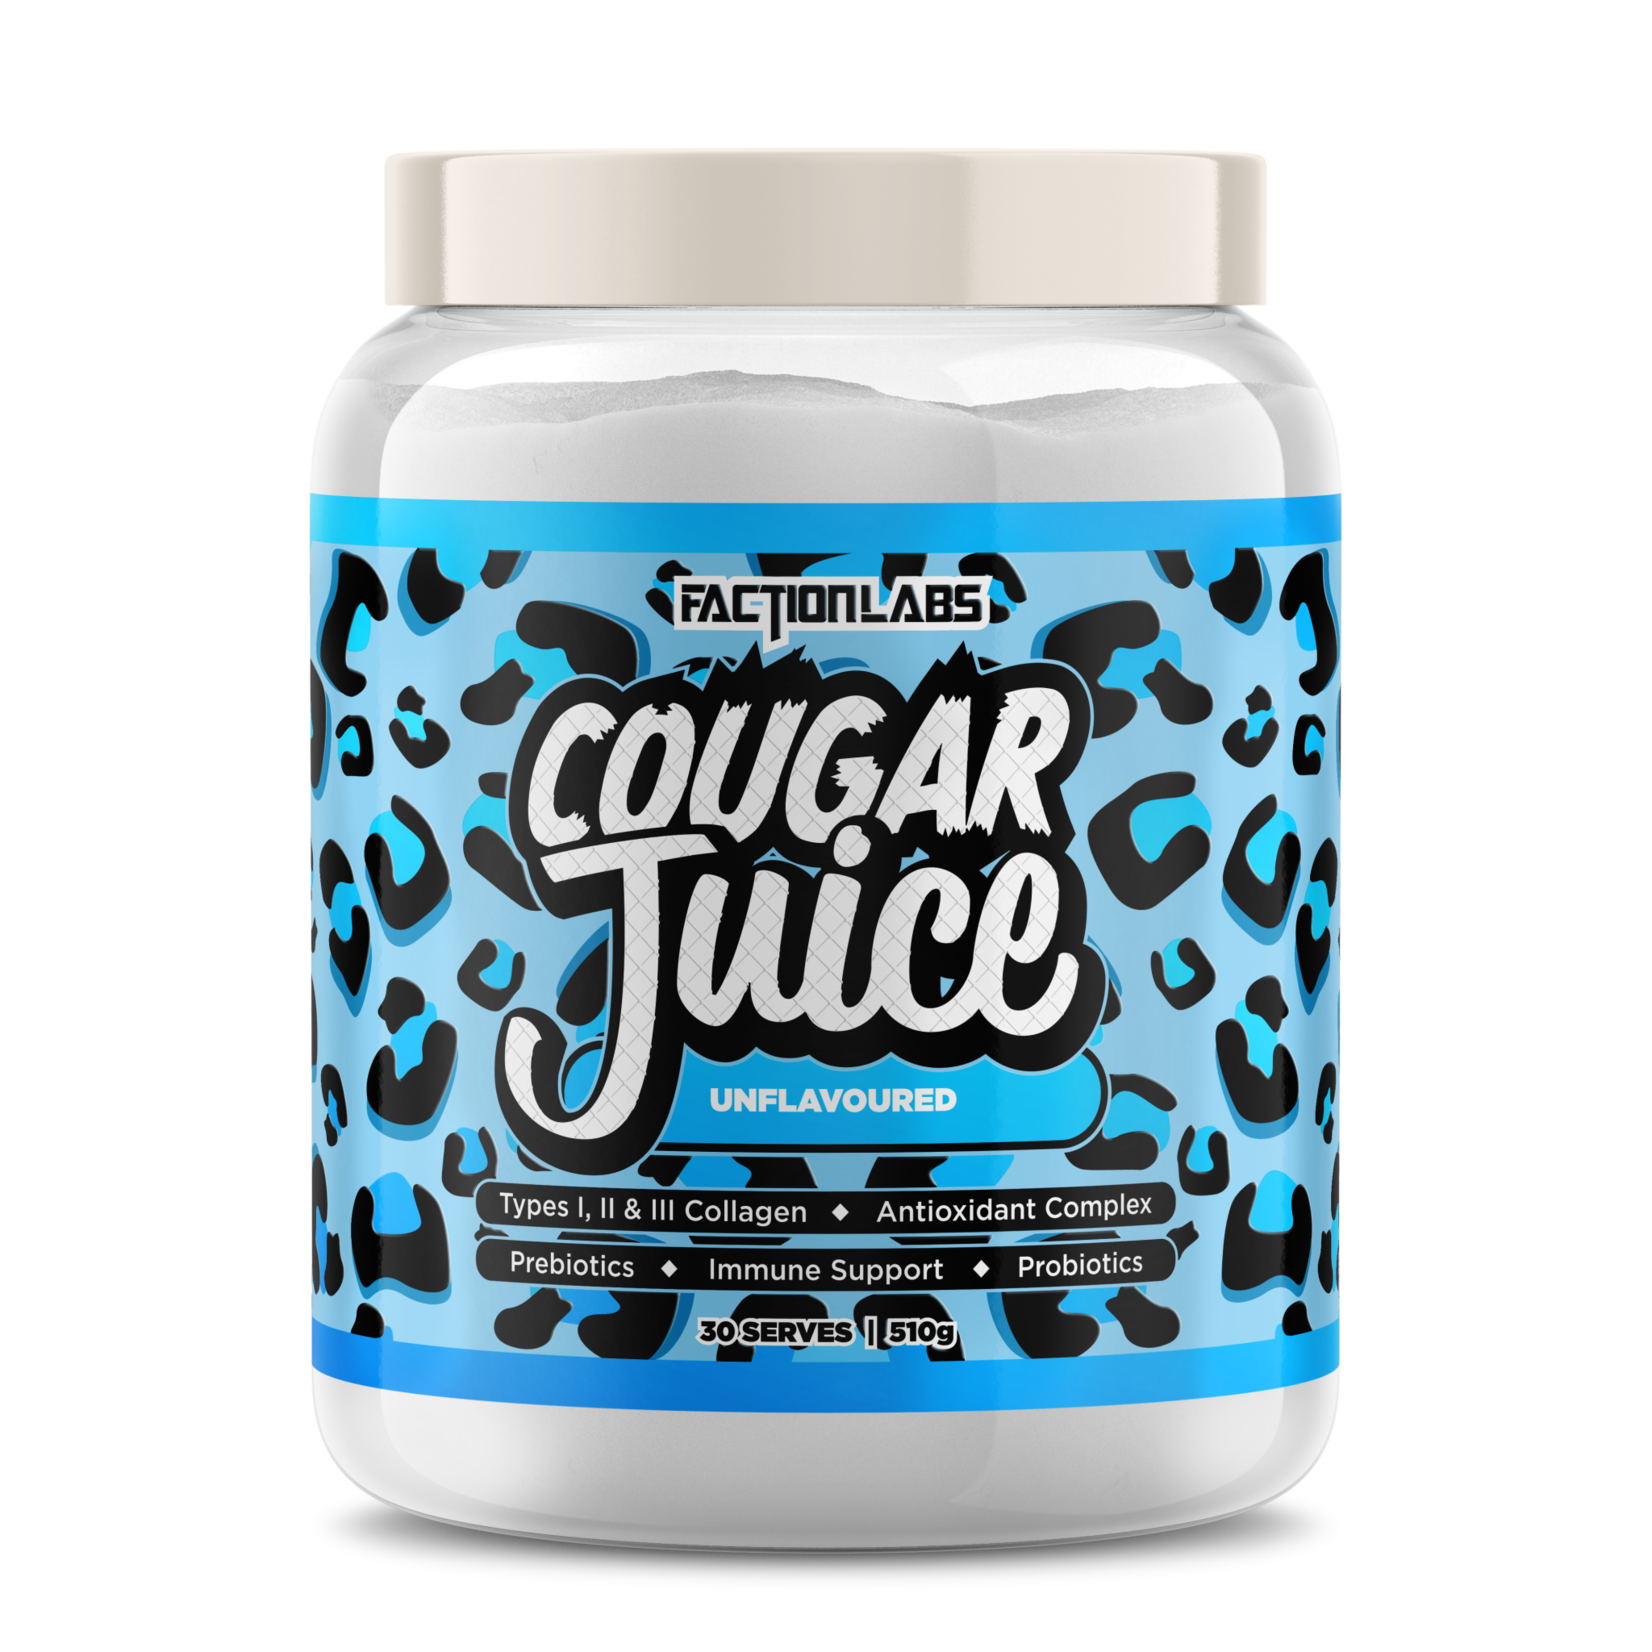 Faction Labs Cougar Juice by Faction Labs